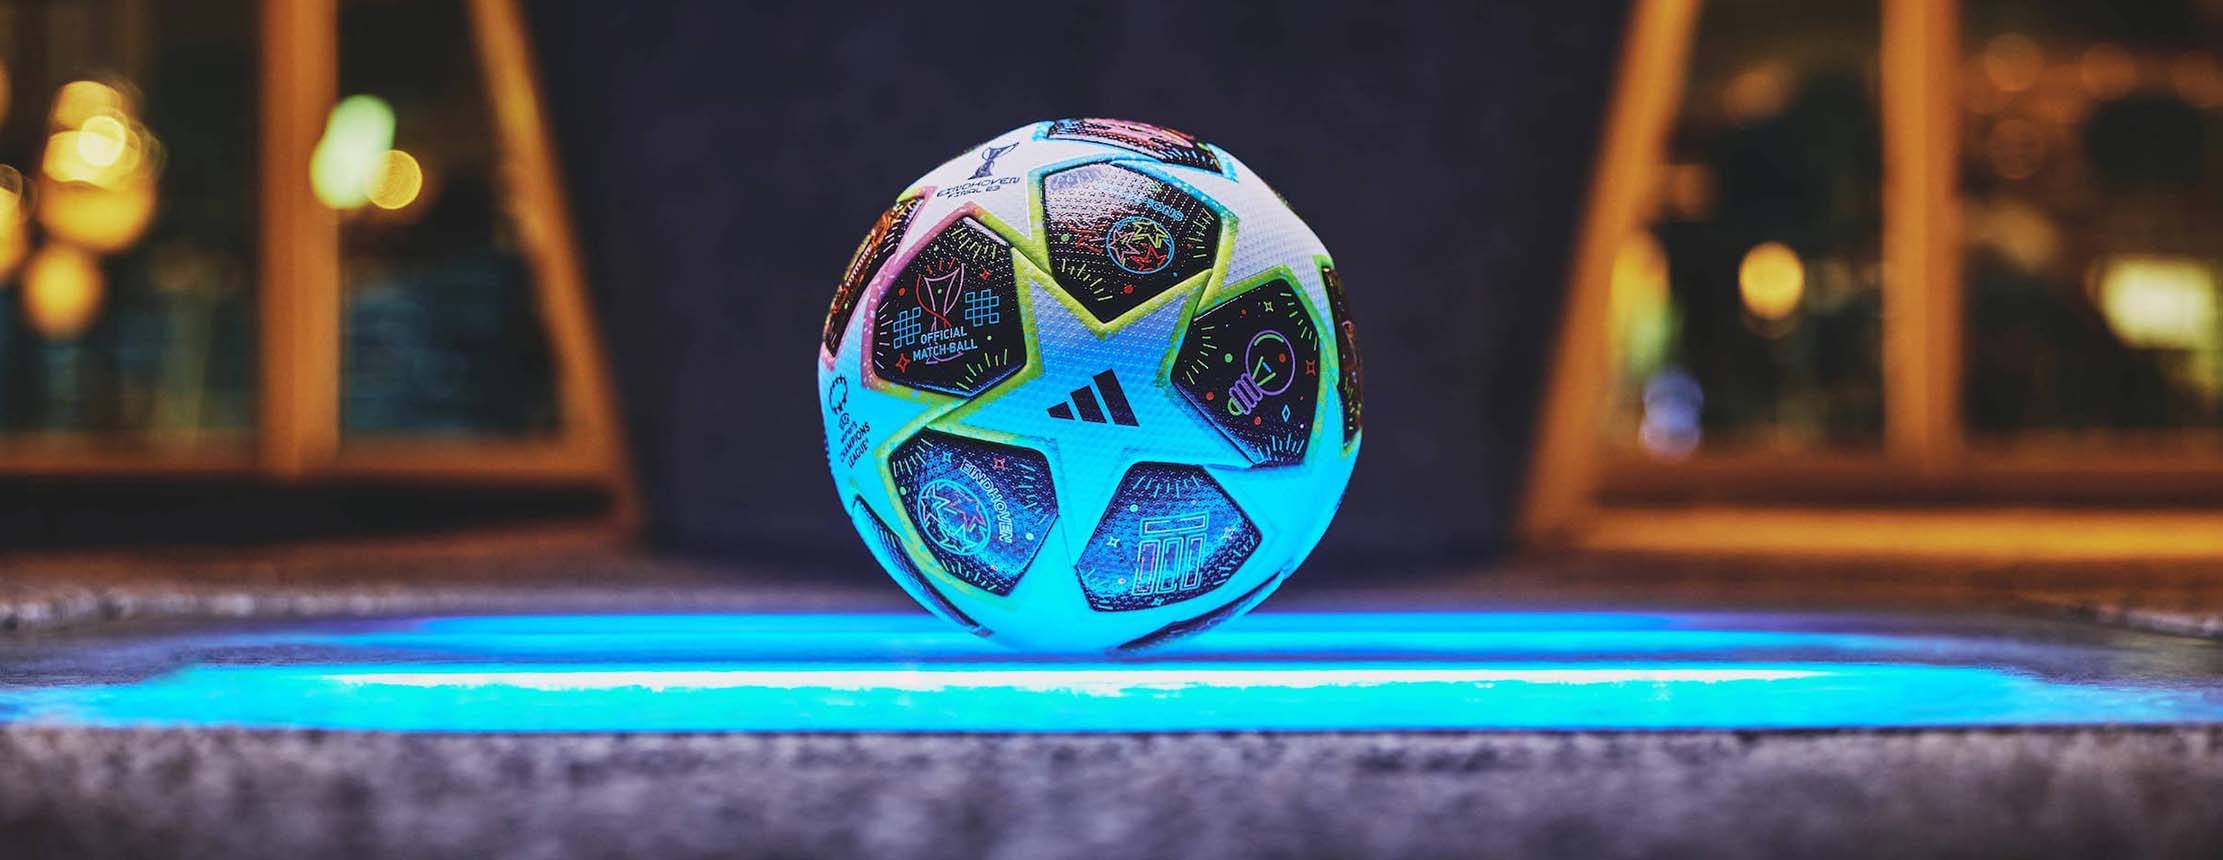 The official match ball of the uefa women’s champions league final 2023 unveiled adidas uwcl pro ball eindhoven